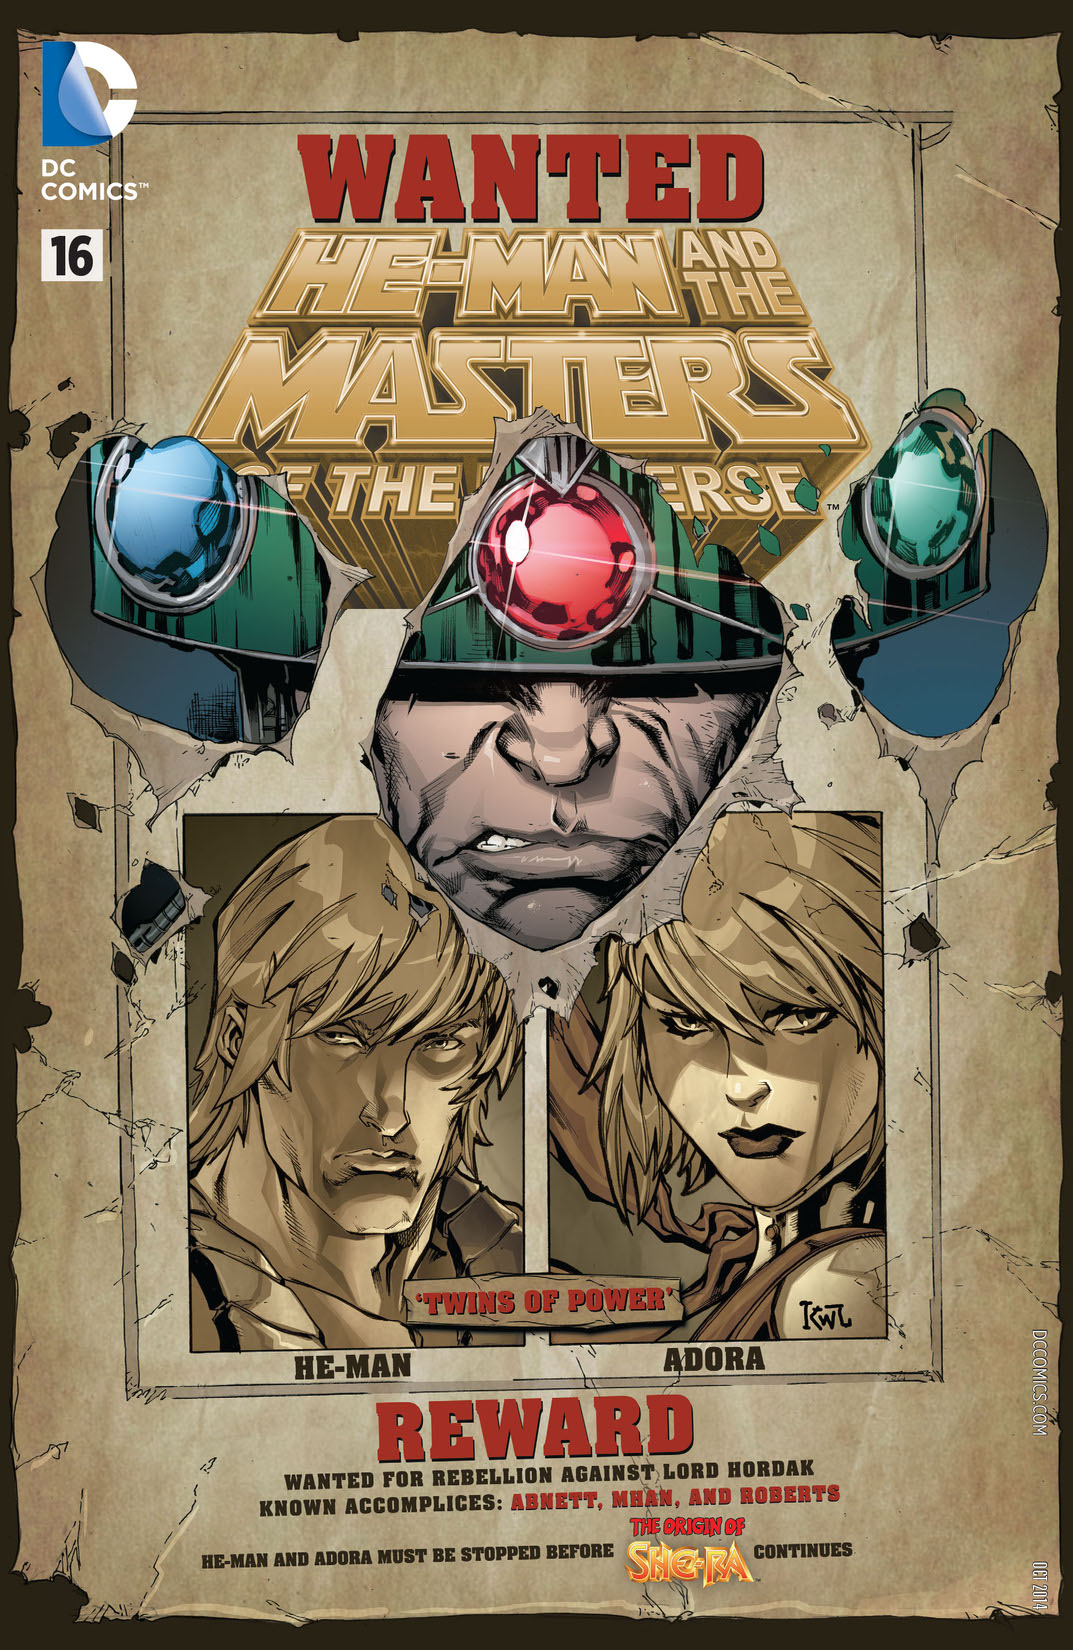 He-Man and the Masters of the Universe (2013-) #16 preview images